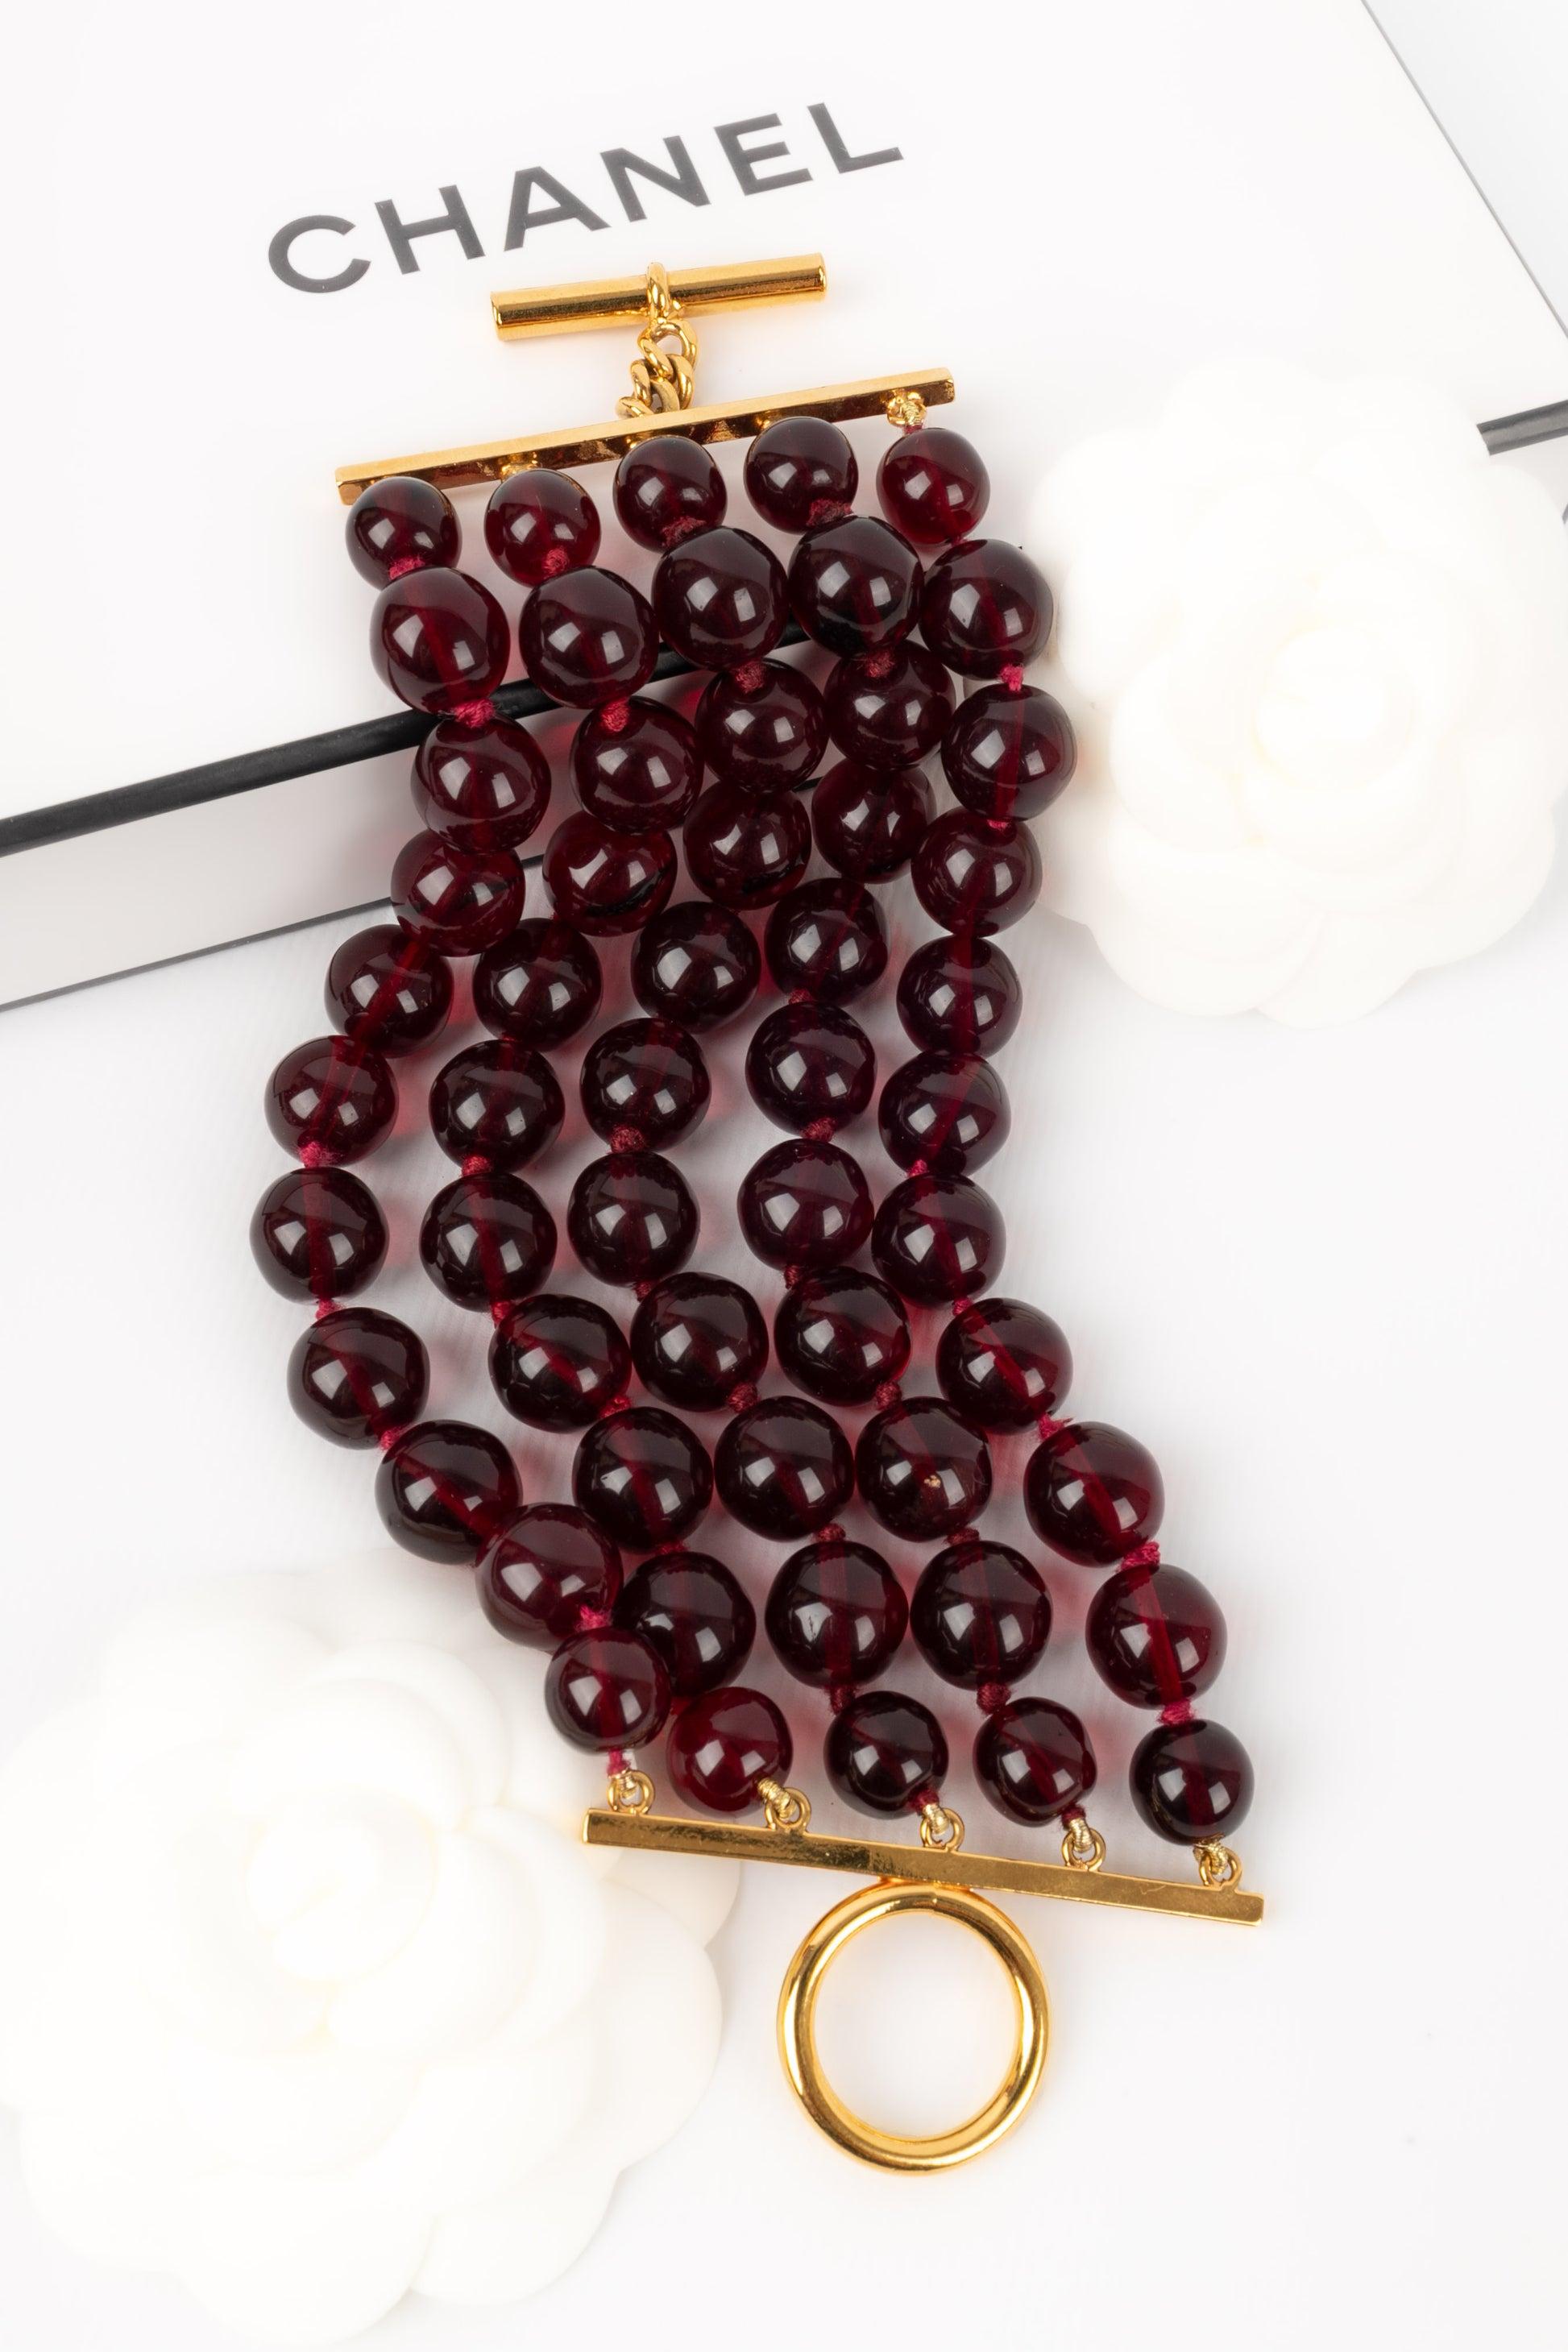 Chanel - (Made in France) Bracelet of red glass pearls. 2cc9 Collection.

Additional information:
Condition: Very good condition
Dimensions: Length: 20 cm - Width: 6.5 cm

Seller Reference: BRAB49
